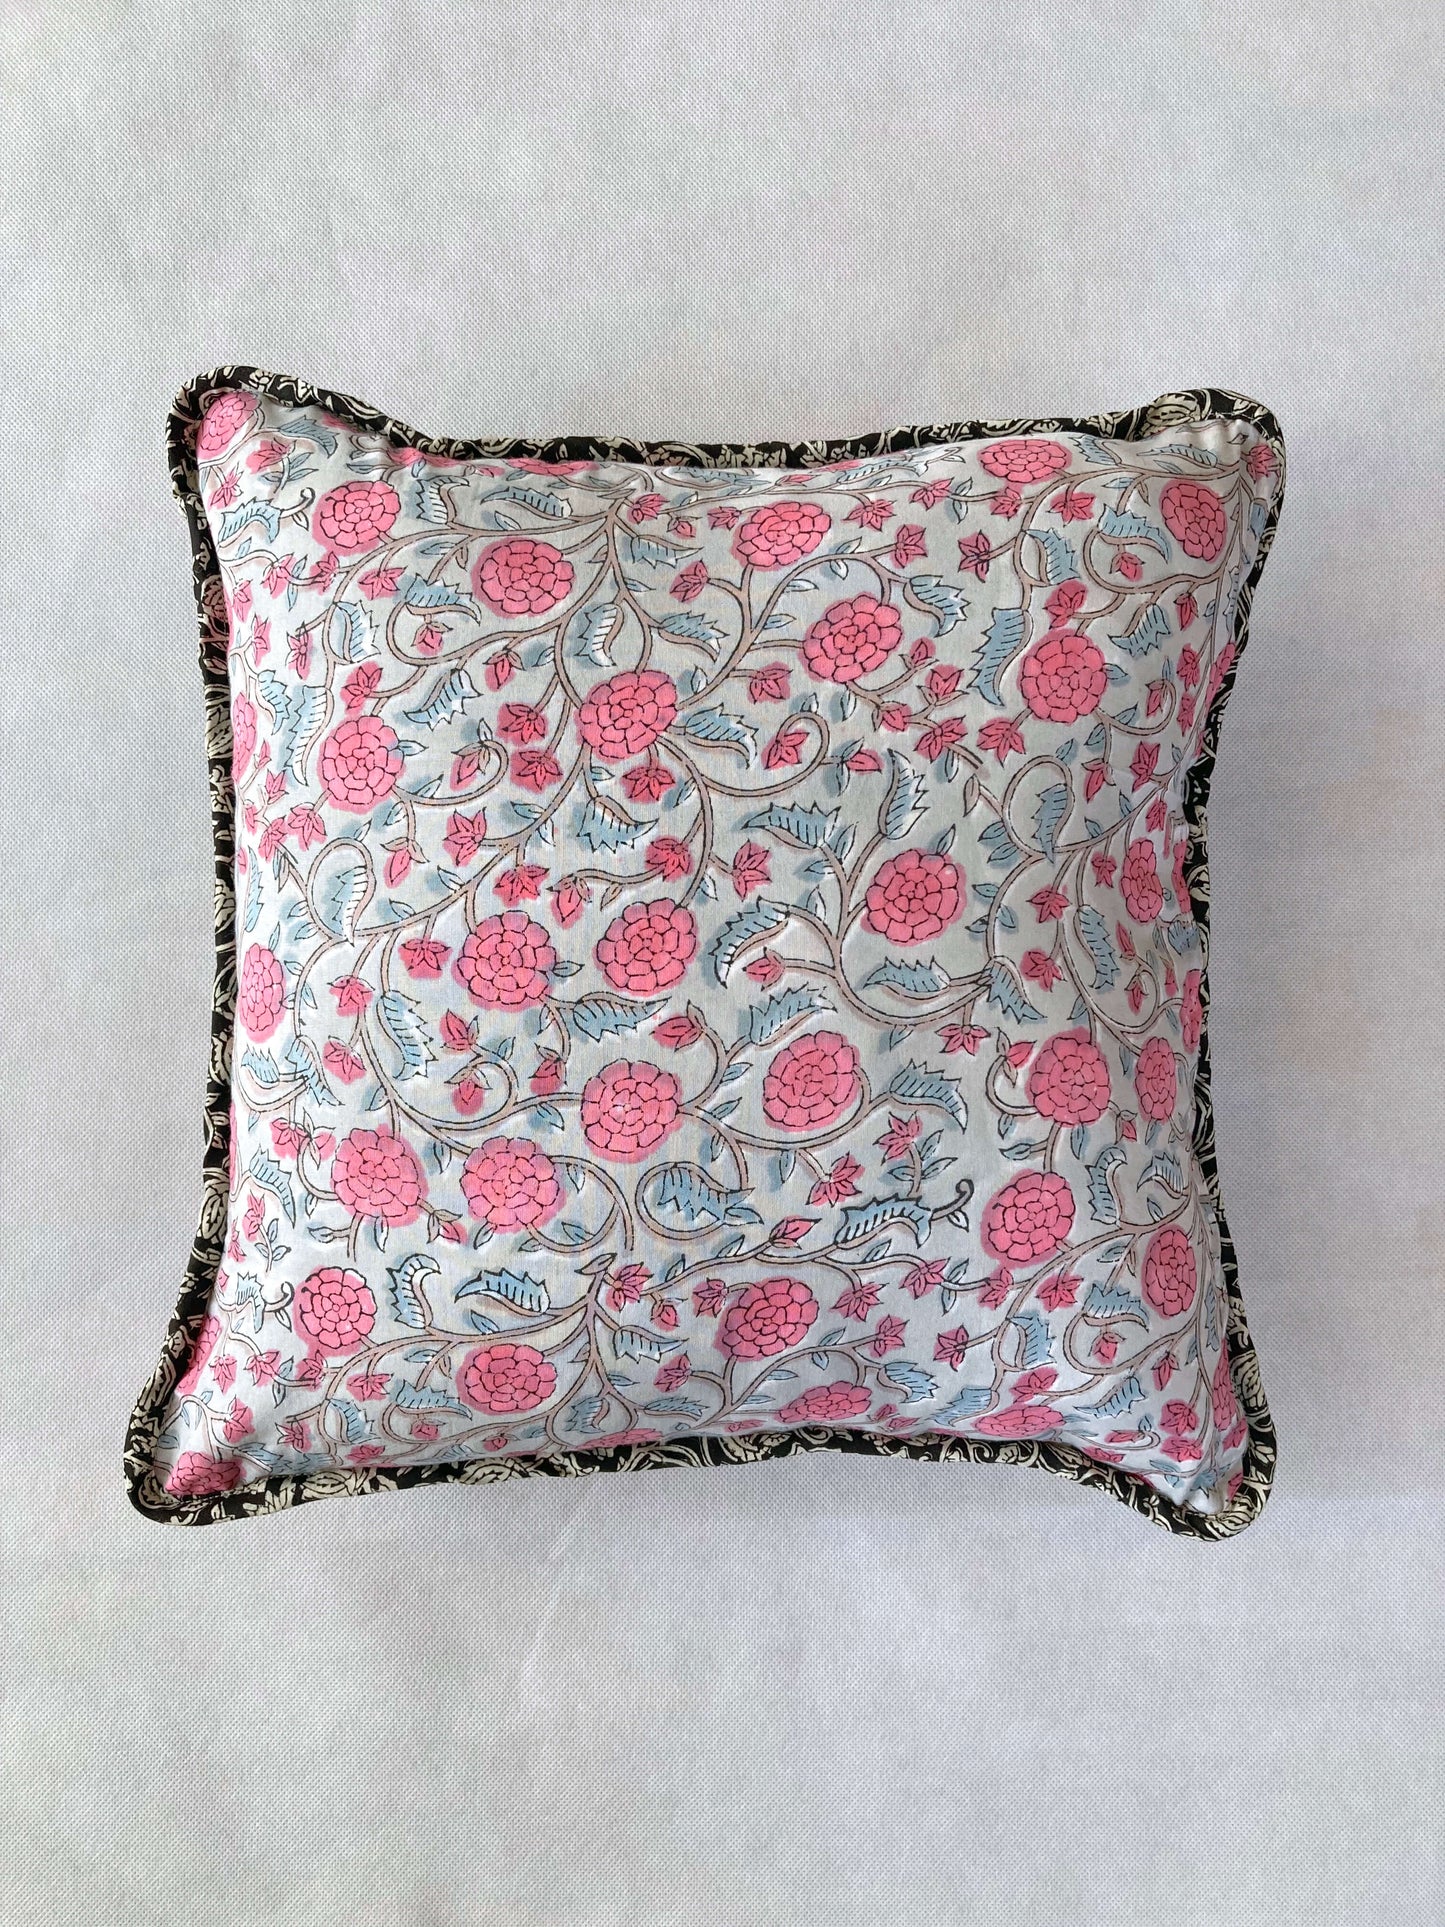 Hand Block Printed Fabric Patchwork Quilting Cushion Cover